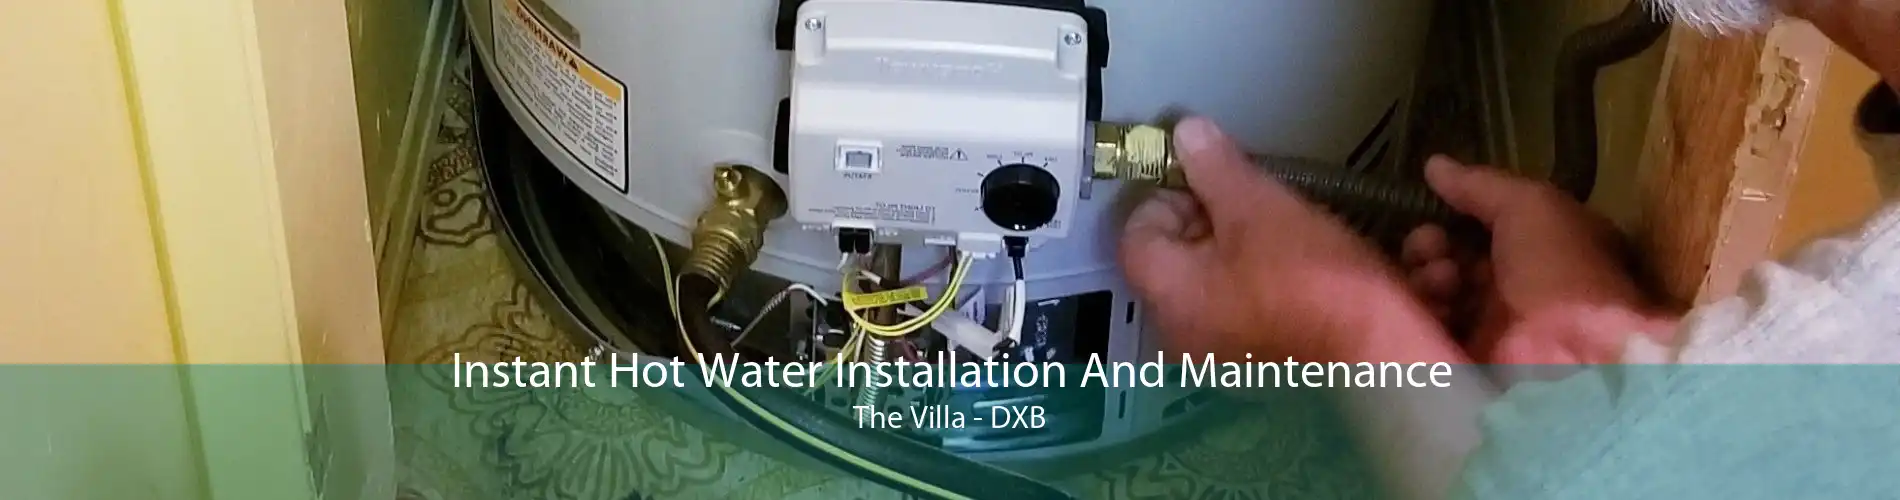 Instant Hot Water Installation And Maintenance The Villa - DXB